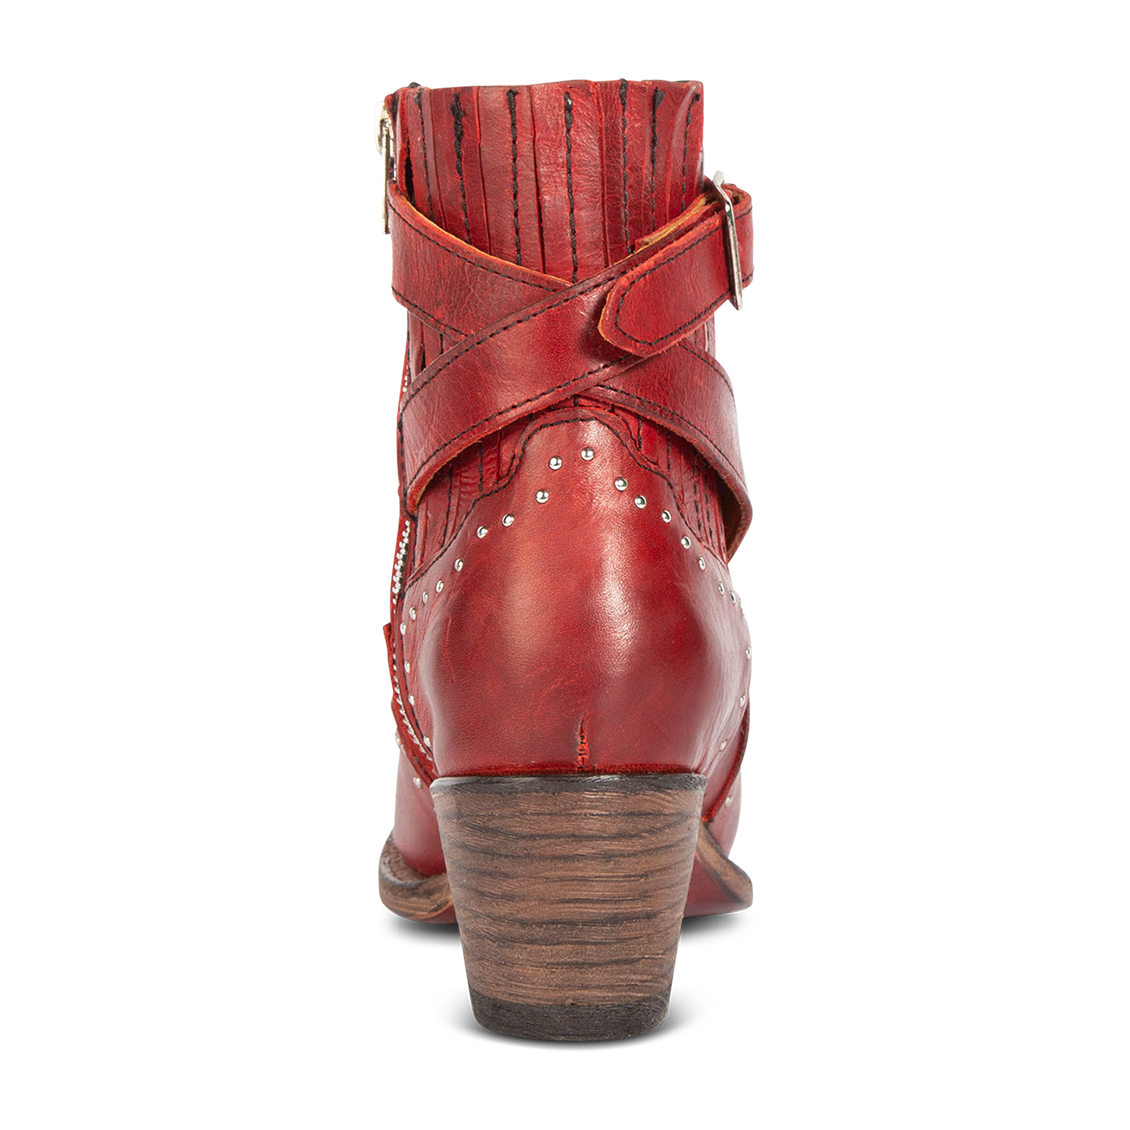 Back view showing wooden heel, gore detailing, and buckle straps on FREEBIRD women's Morgan red leather ankle bootie